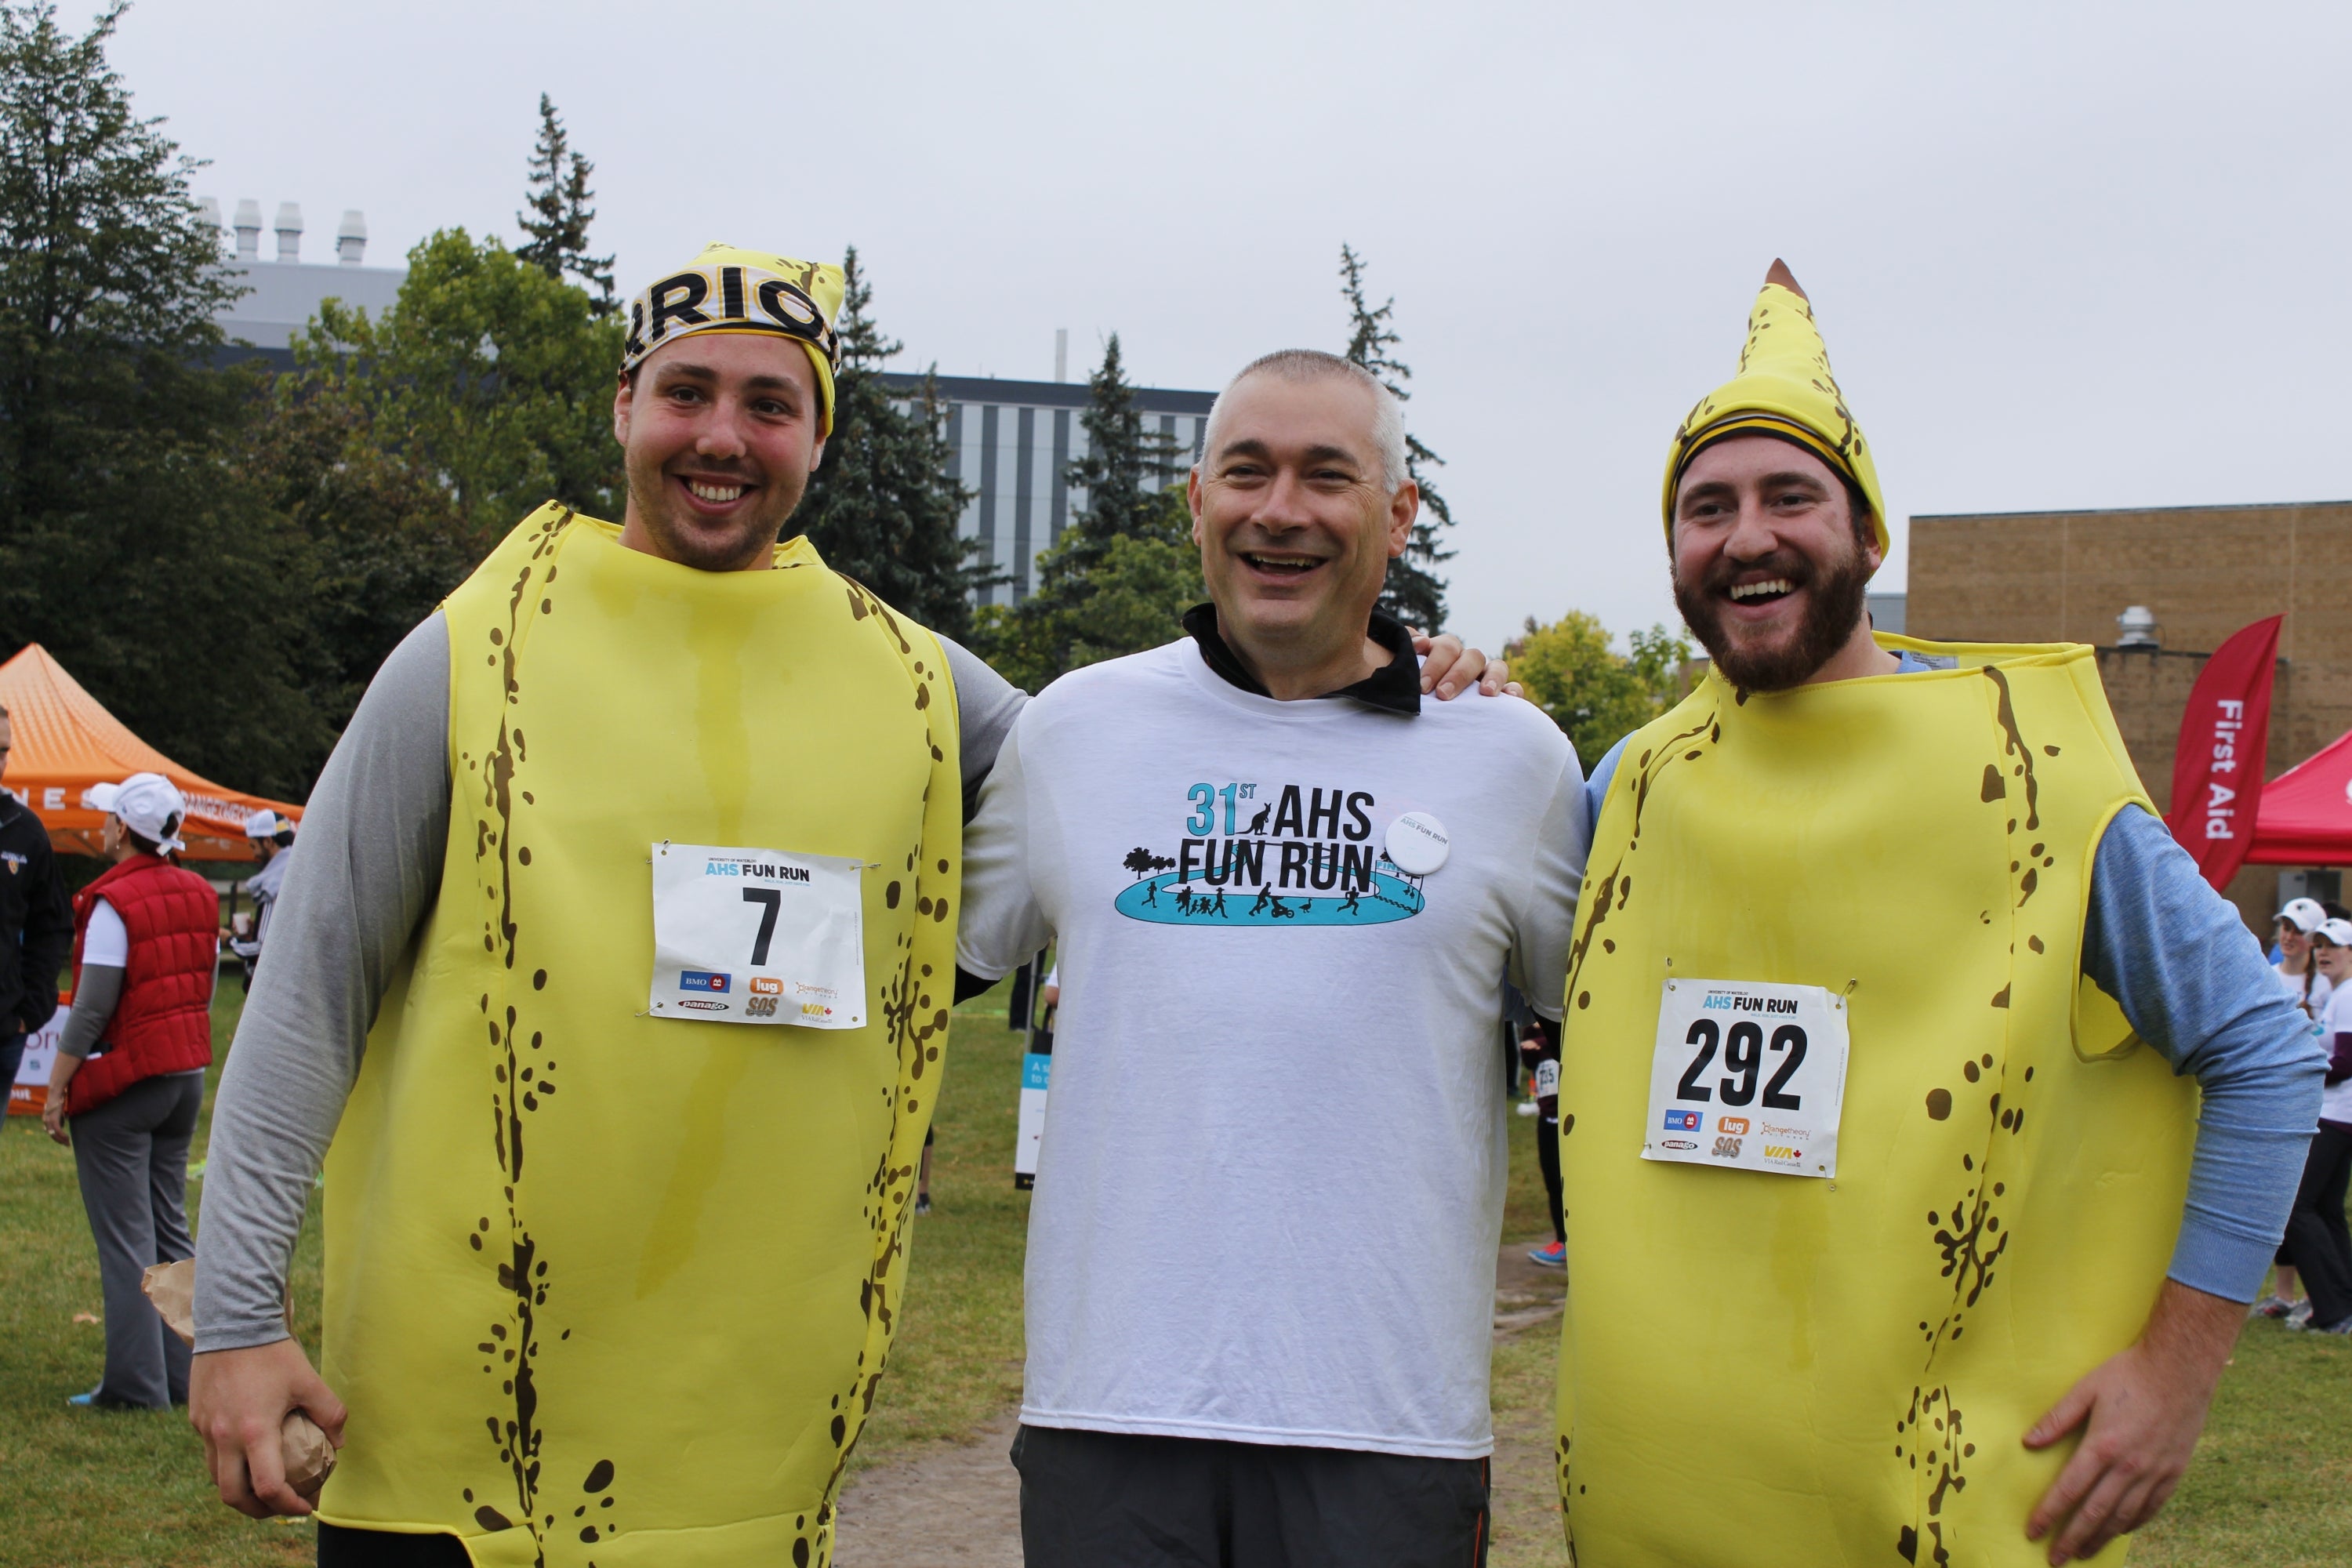 Dean of AHS with two runners dressed in costumes 